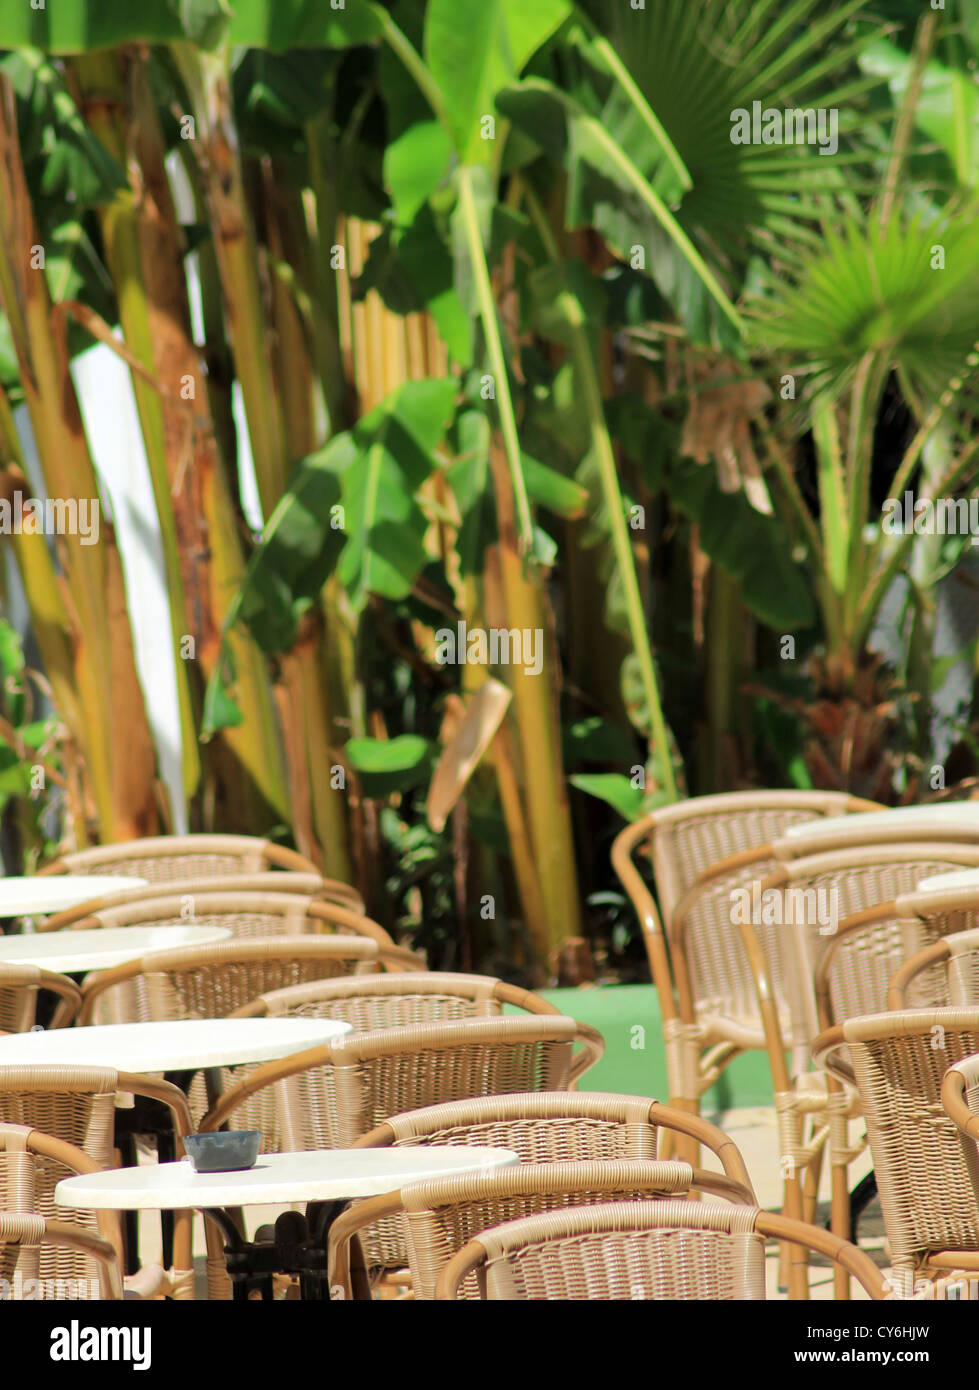 Outdoor restaurant tables with leafy green palms in background. Stock Photo